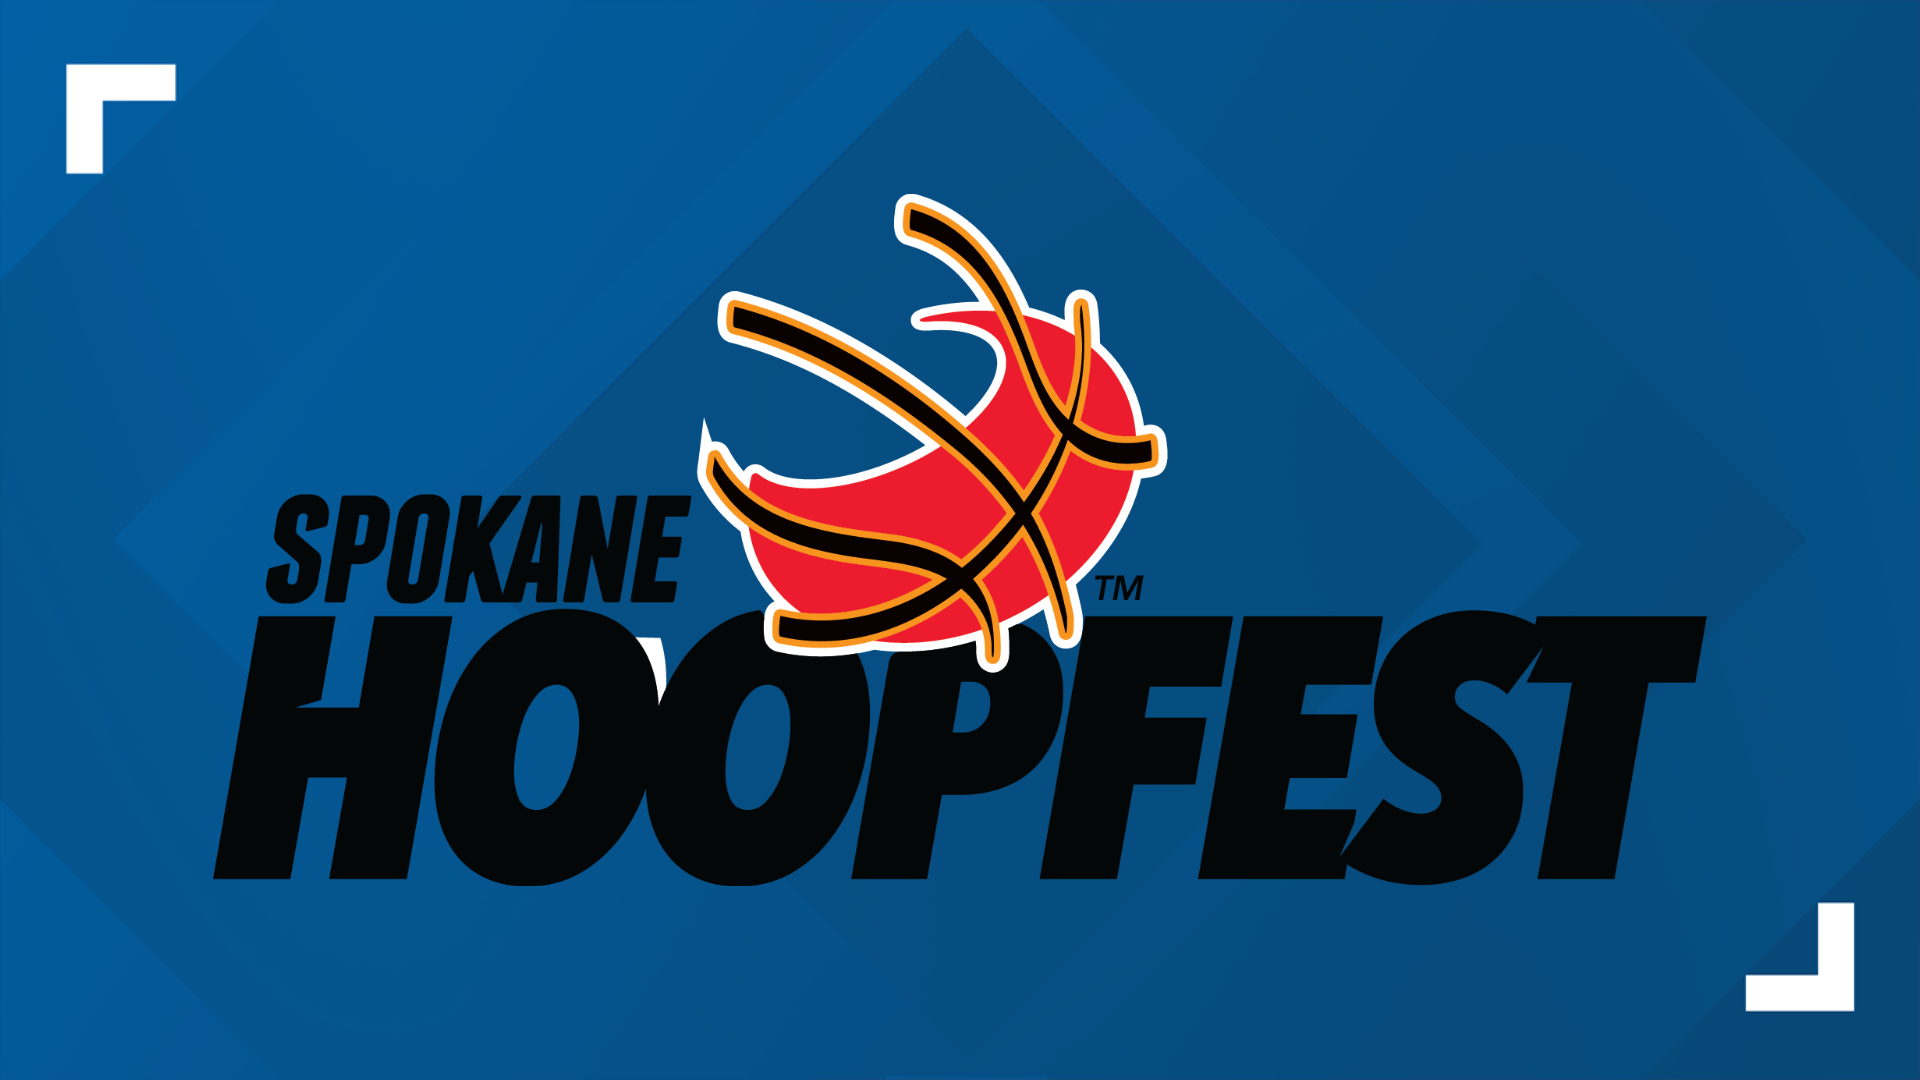 For the first time in 31 years, Hoopfest will not be played on the streets of Spokane amid the coronavirus pandemic.